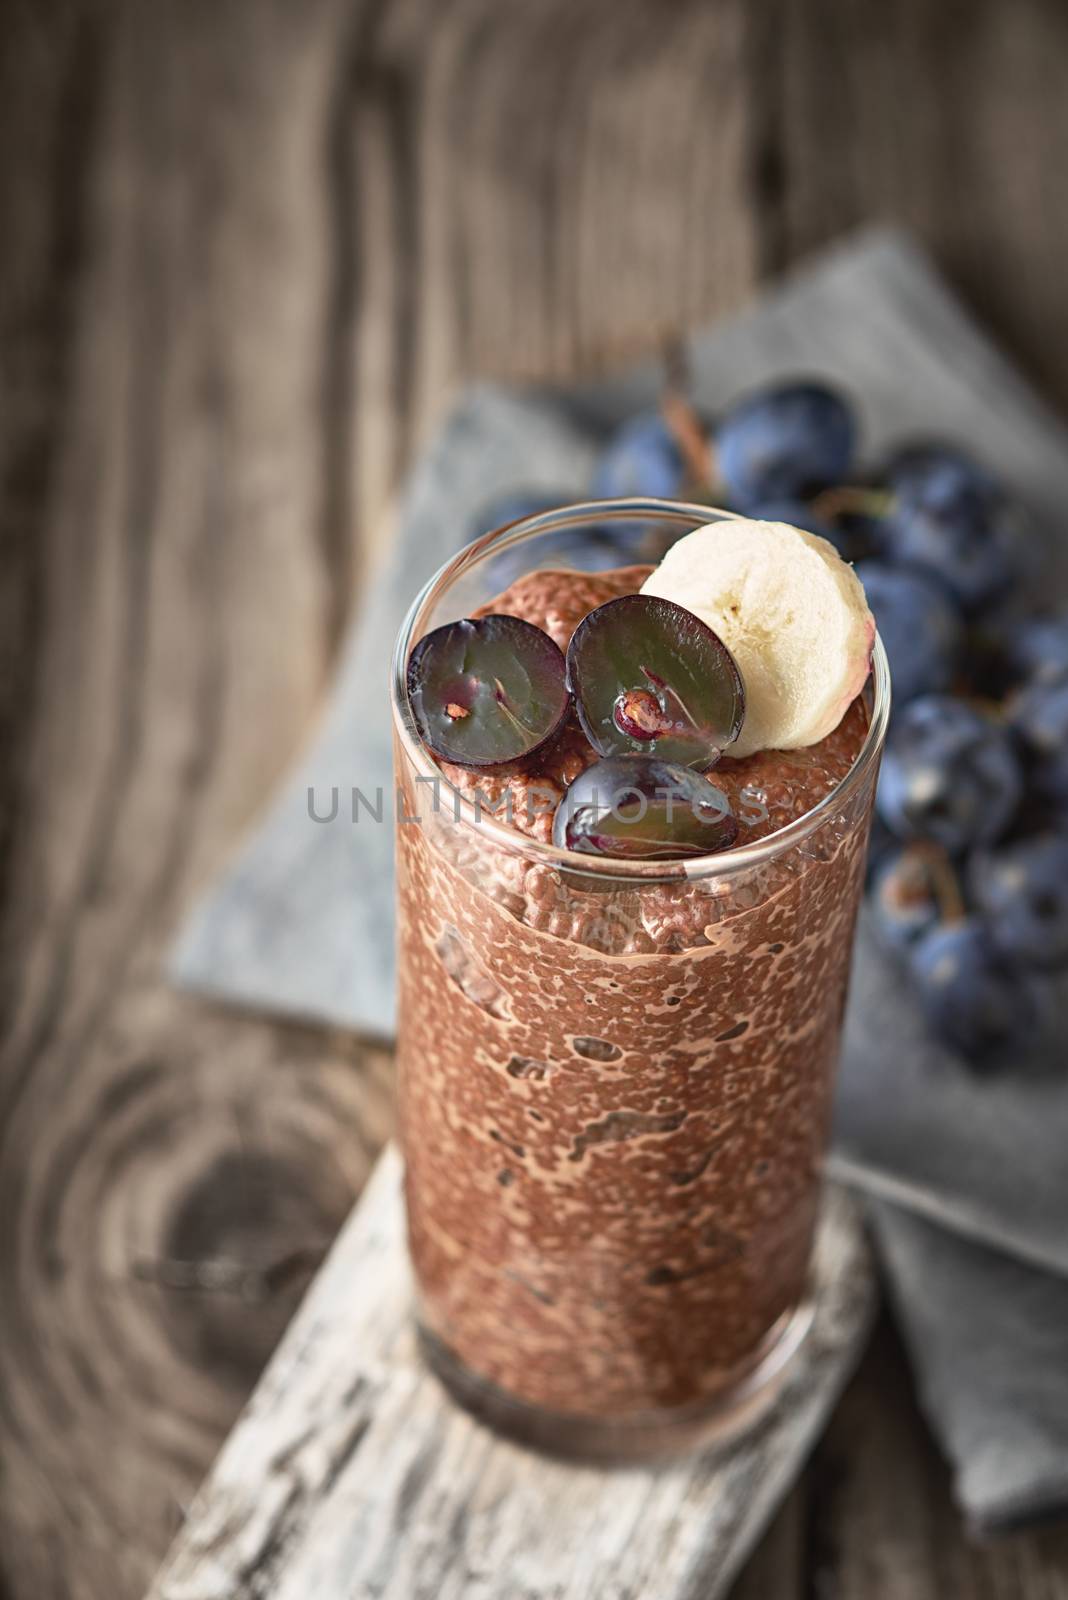 Chocolate chia pudding with fruit in the glass on the wooden table by Deniskarpenkov